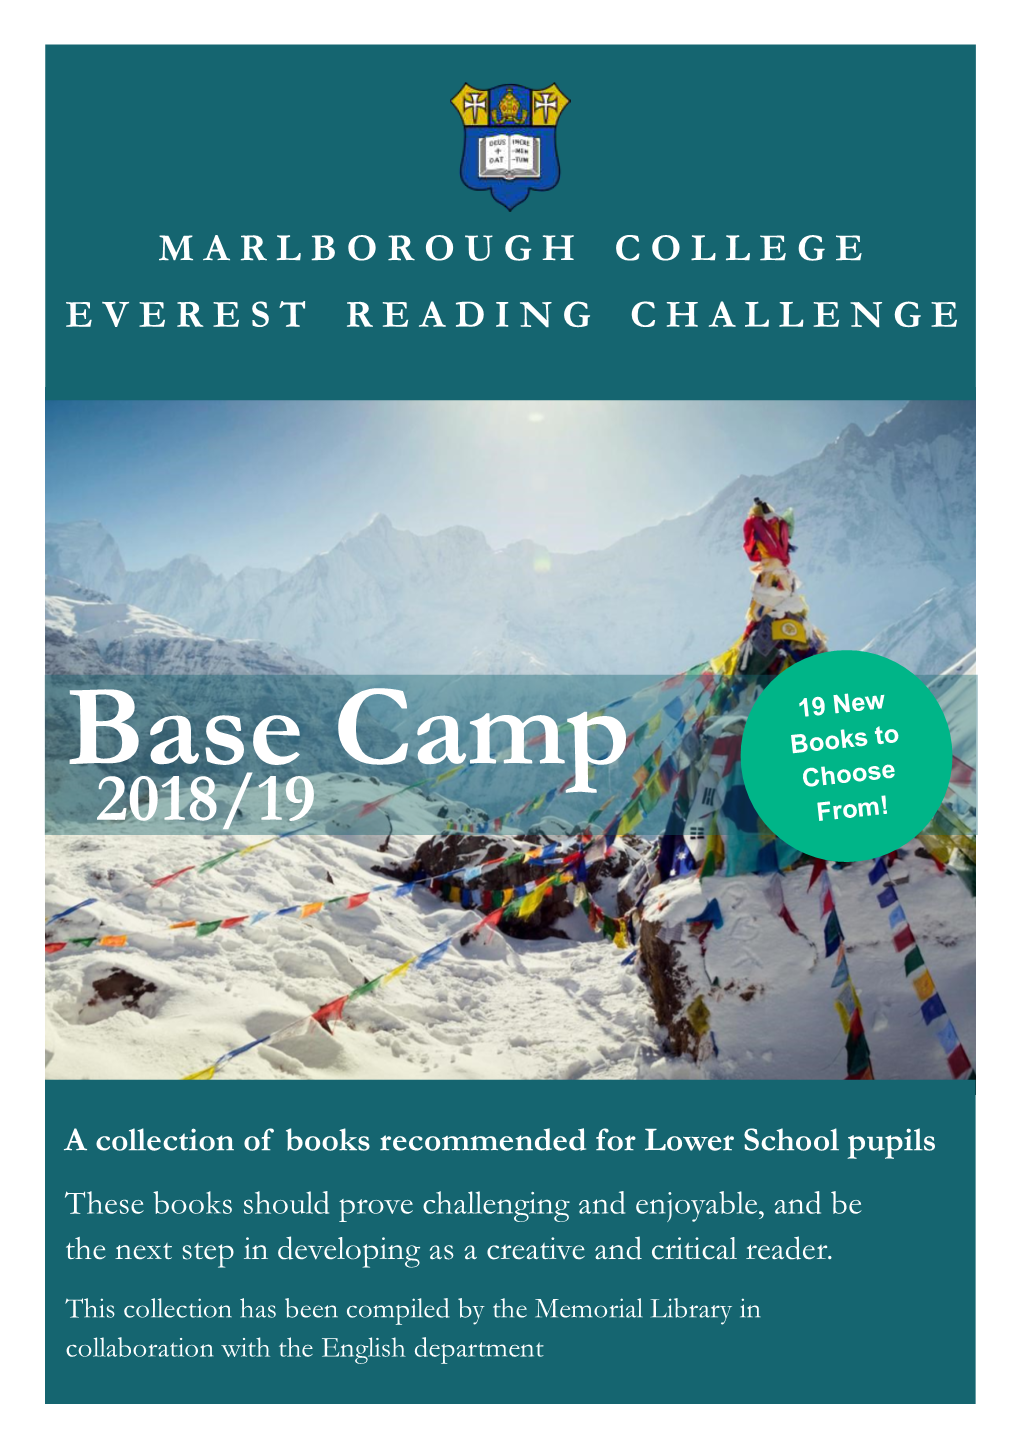 Base Camp Books to Choose 2018/19 From!